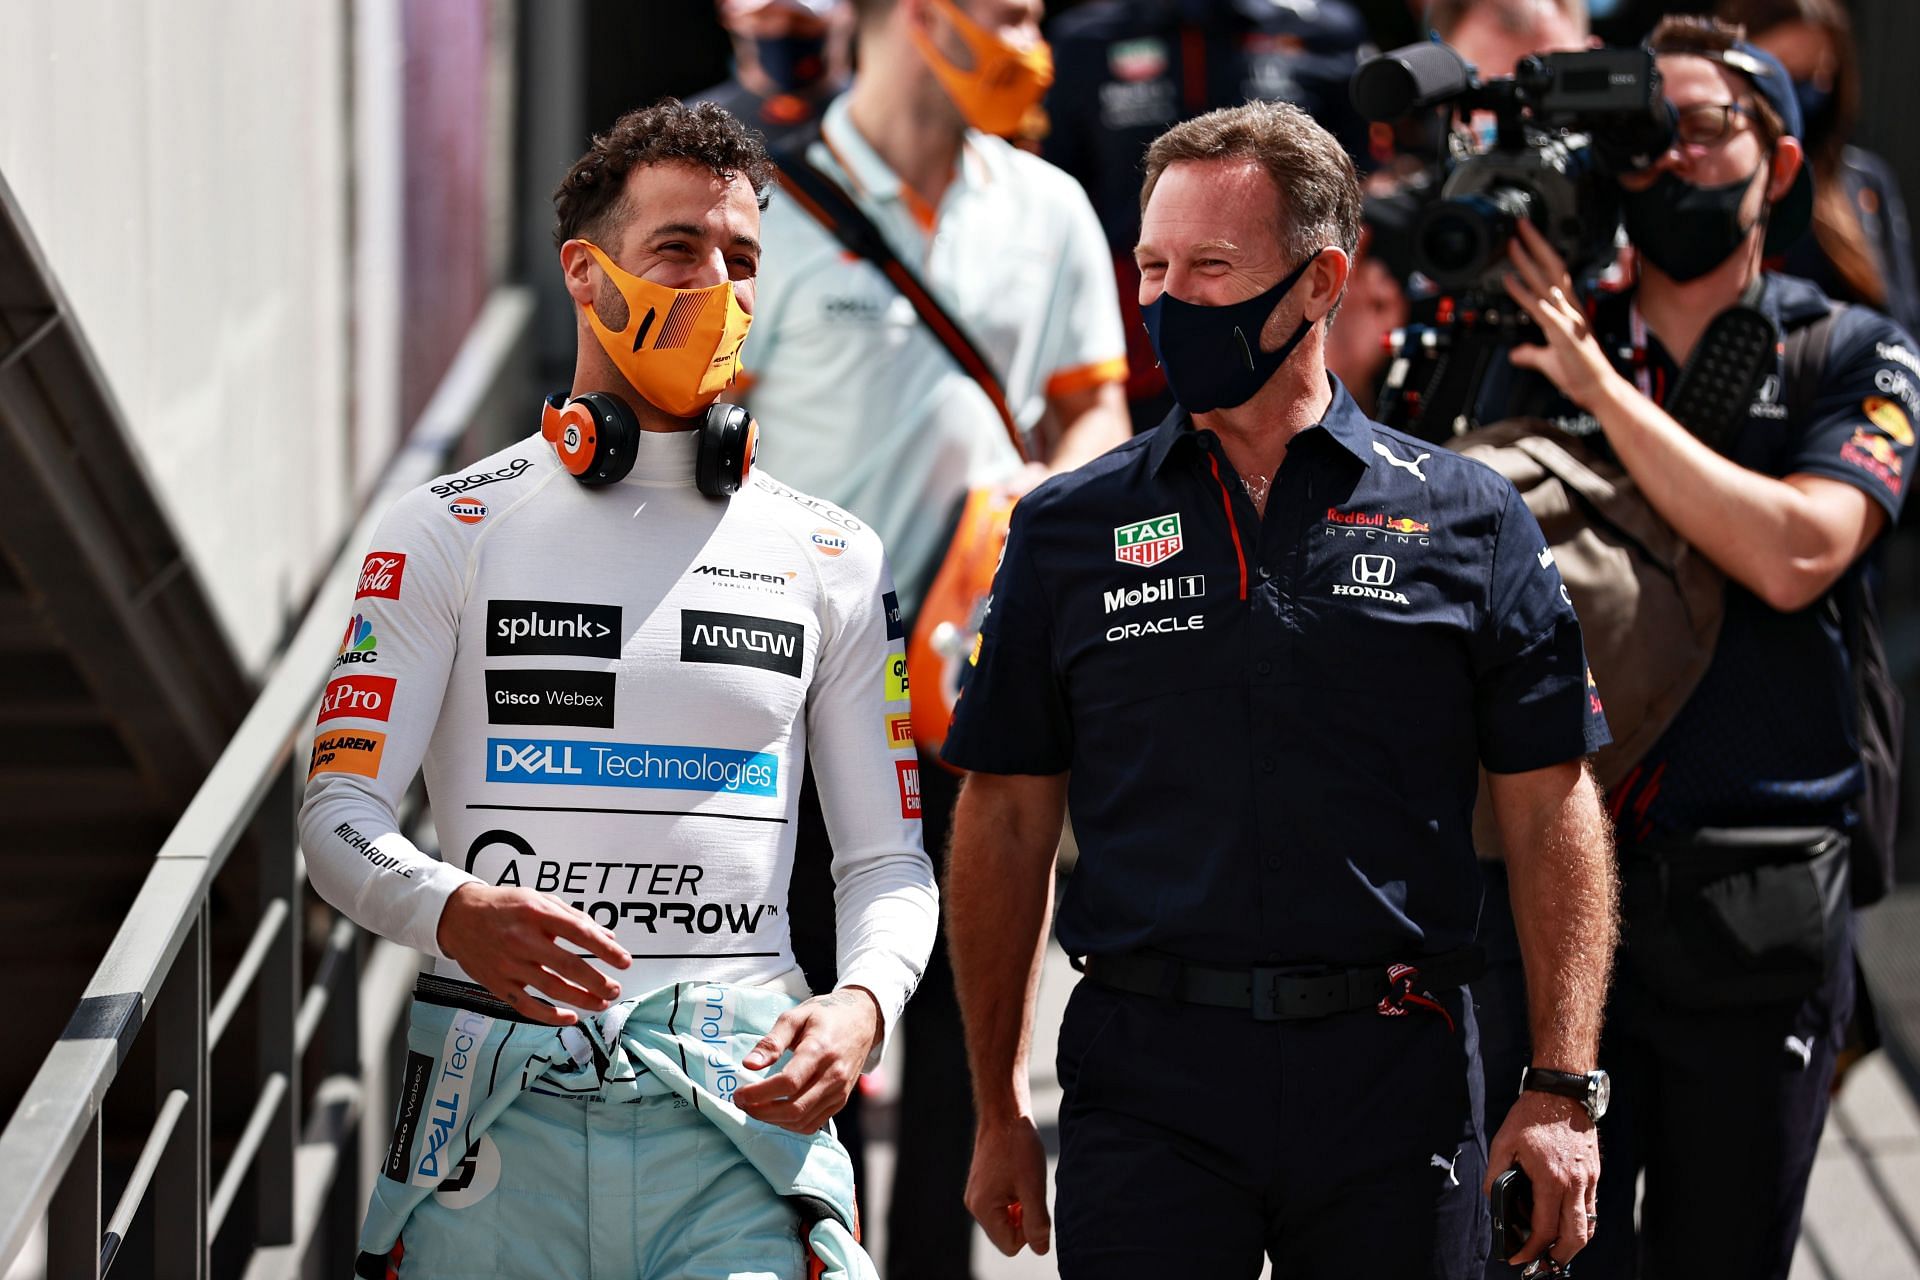 McLaren driver Daniel Ricciardo (left) and Red Bull team principal Christian Horner share a moment during the 2021 F1 Monaco GP weekend (Photo by Mark Thompson/Getty Images)